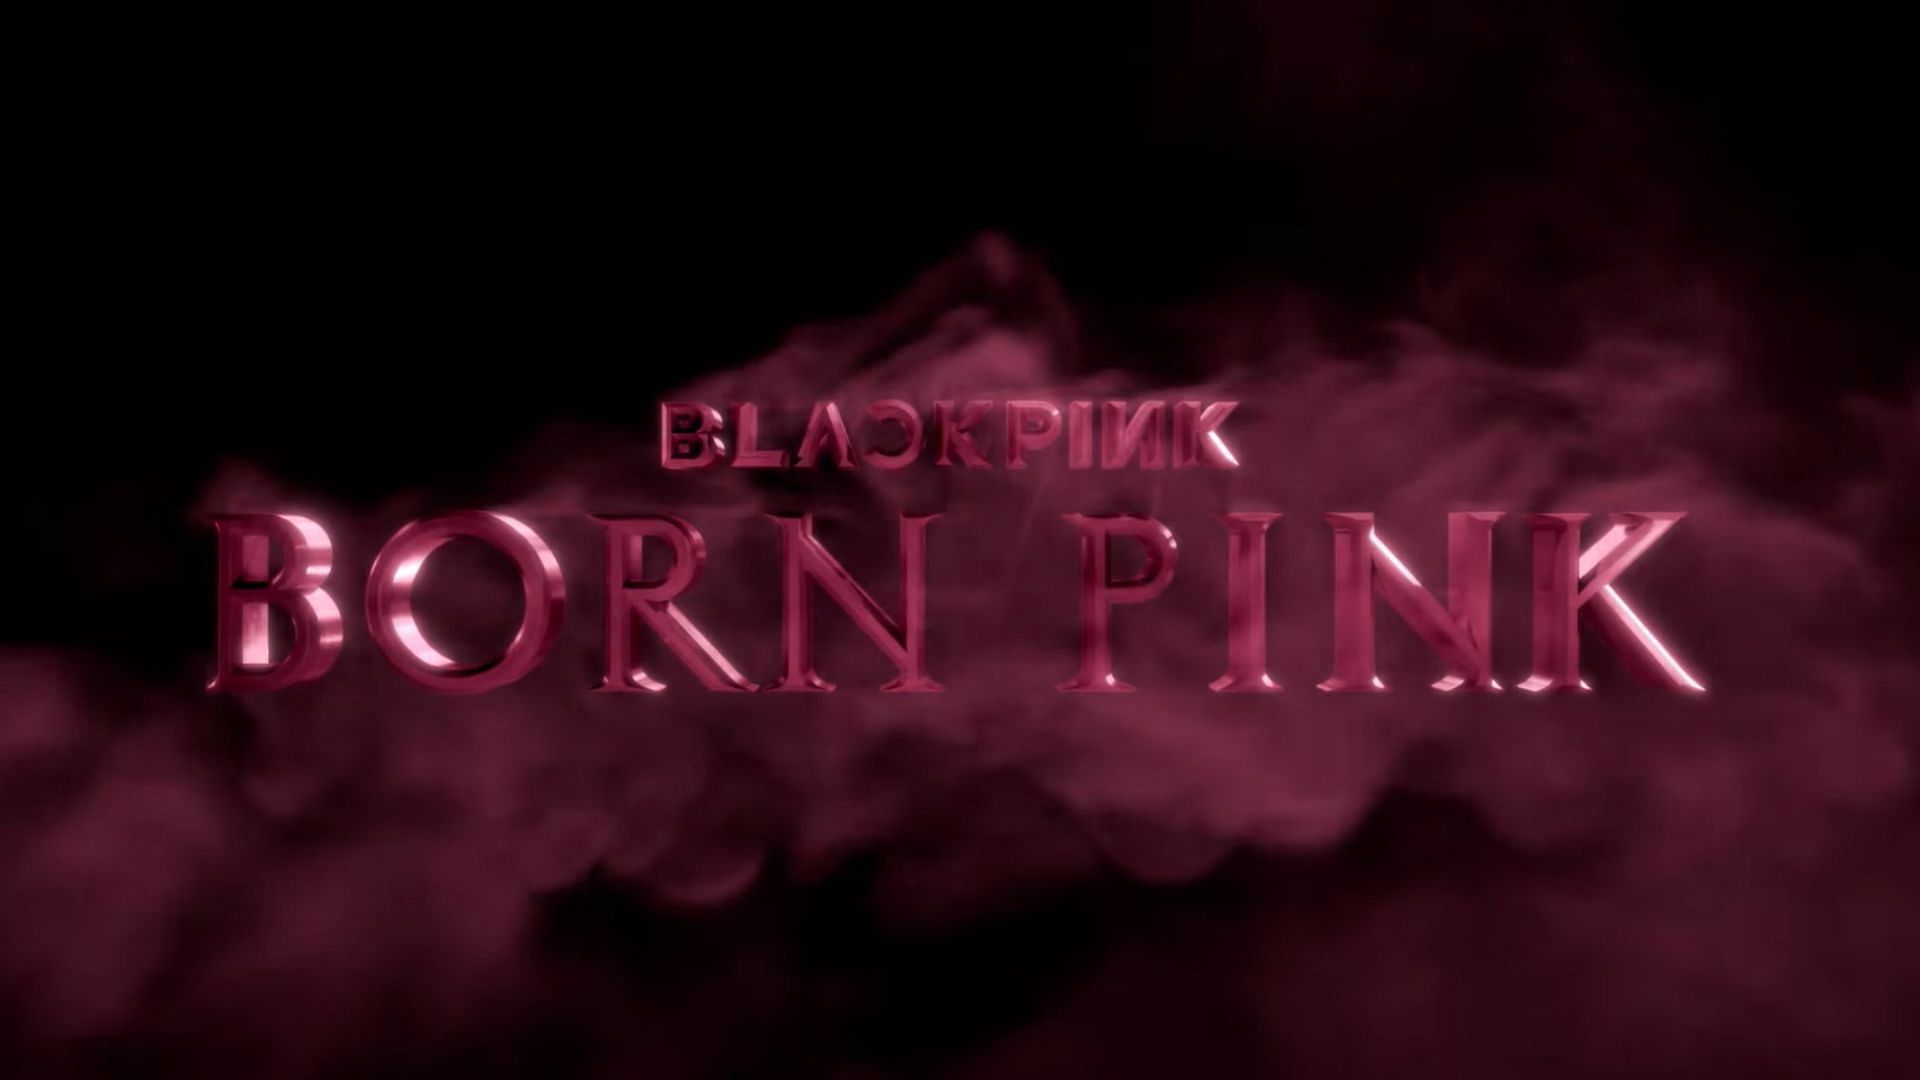 BLACKPINK announces comeback with BORN PINK, fans say 'no more clowning'